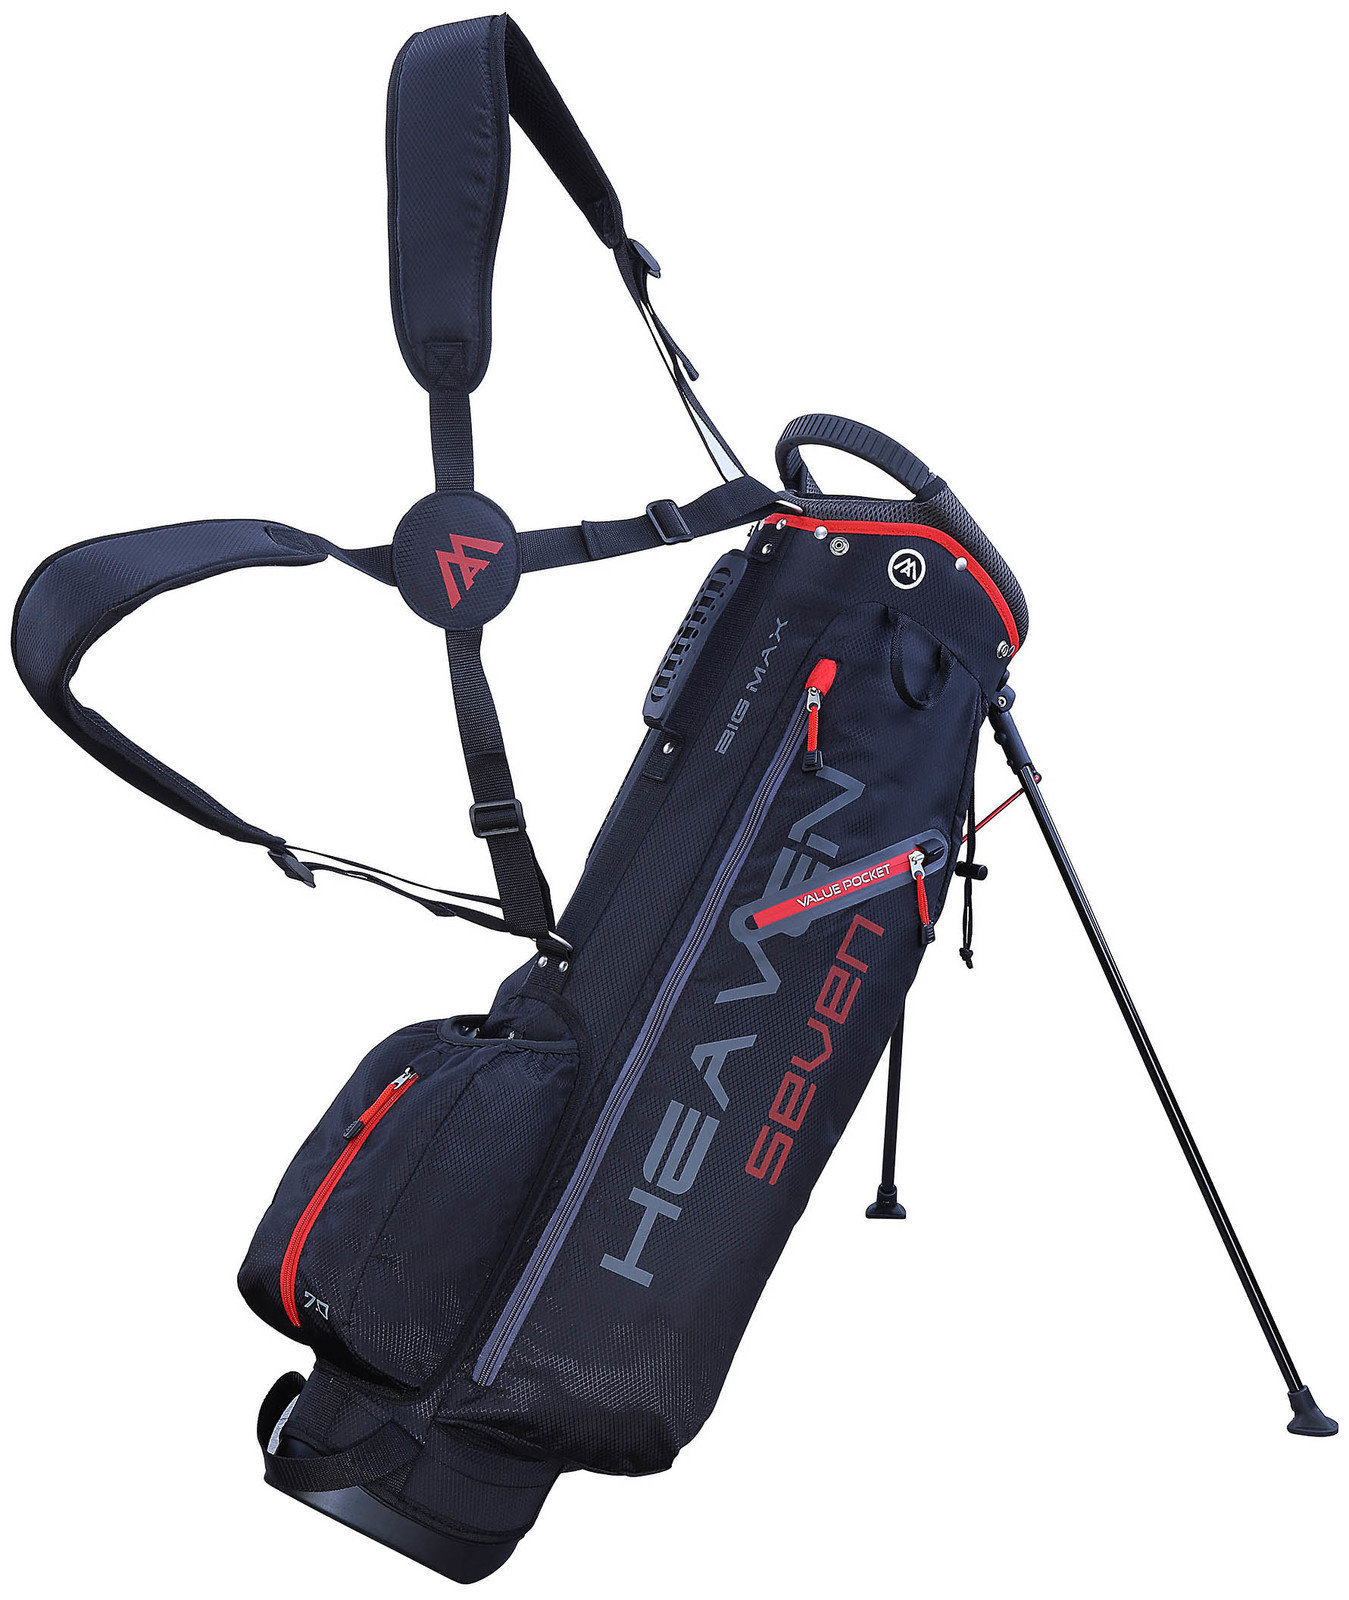 Stand Bag Big Max Heaven 7 Black/Red Stand Bag